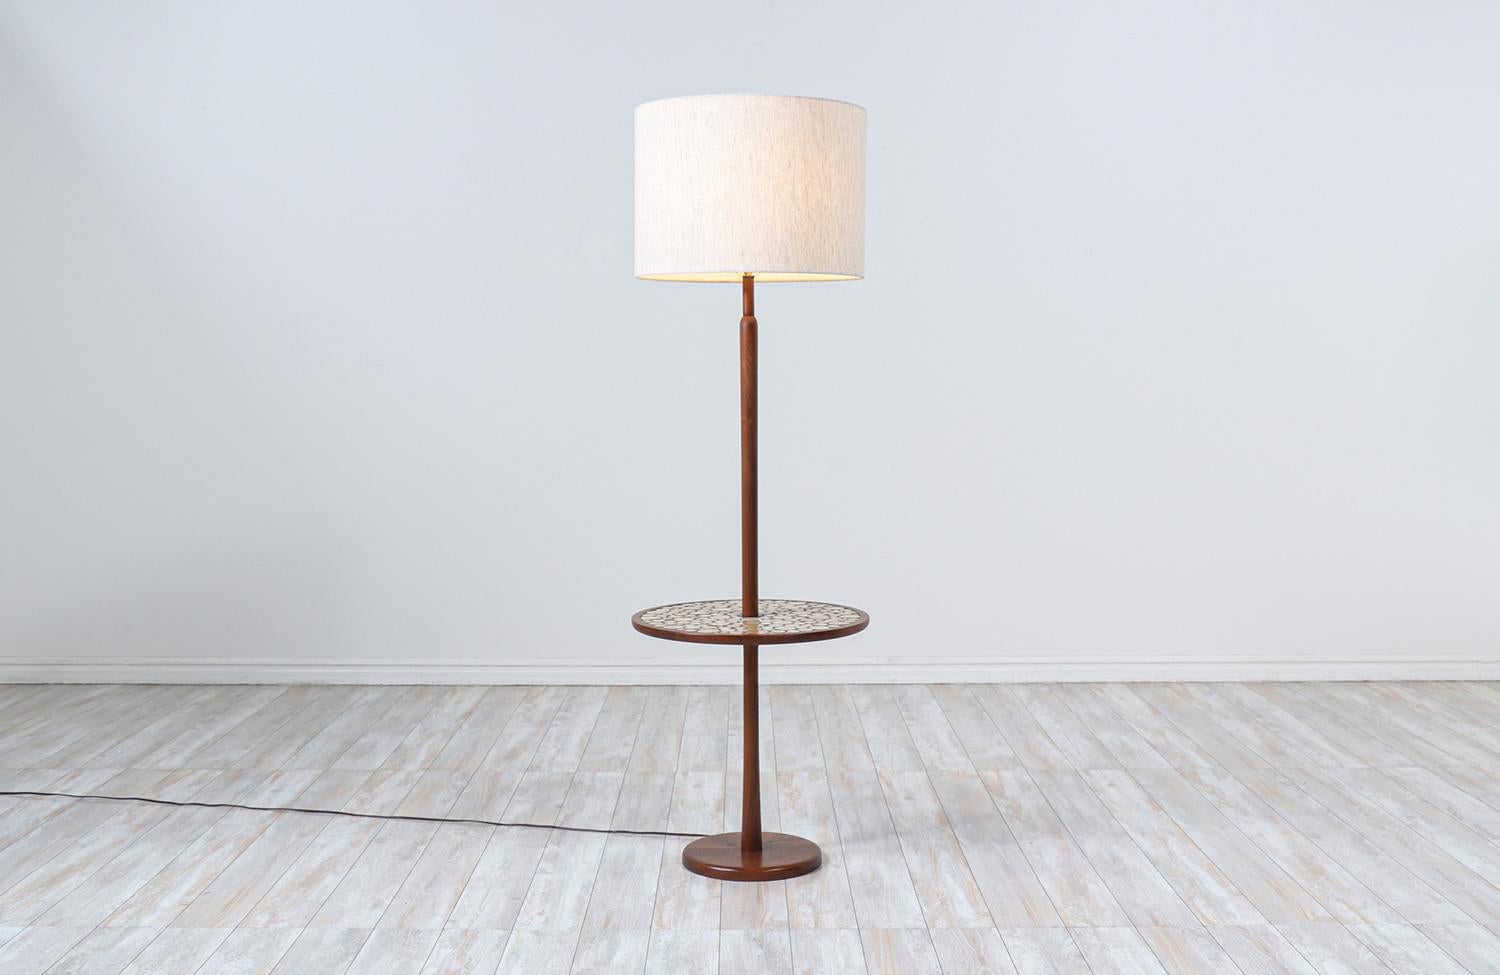 Dimensions:

60in H x 19in W x 19in D 

Lamp shade: 13in H x 18in W 
Side table height: 20in.